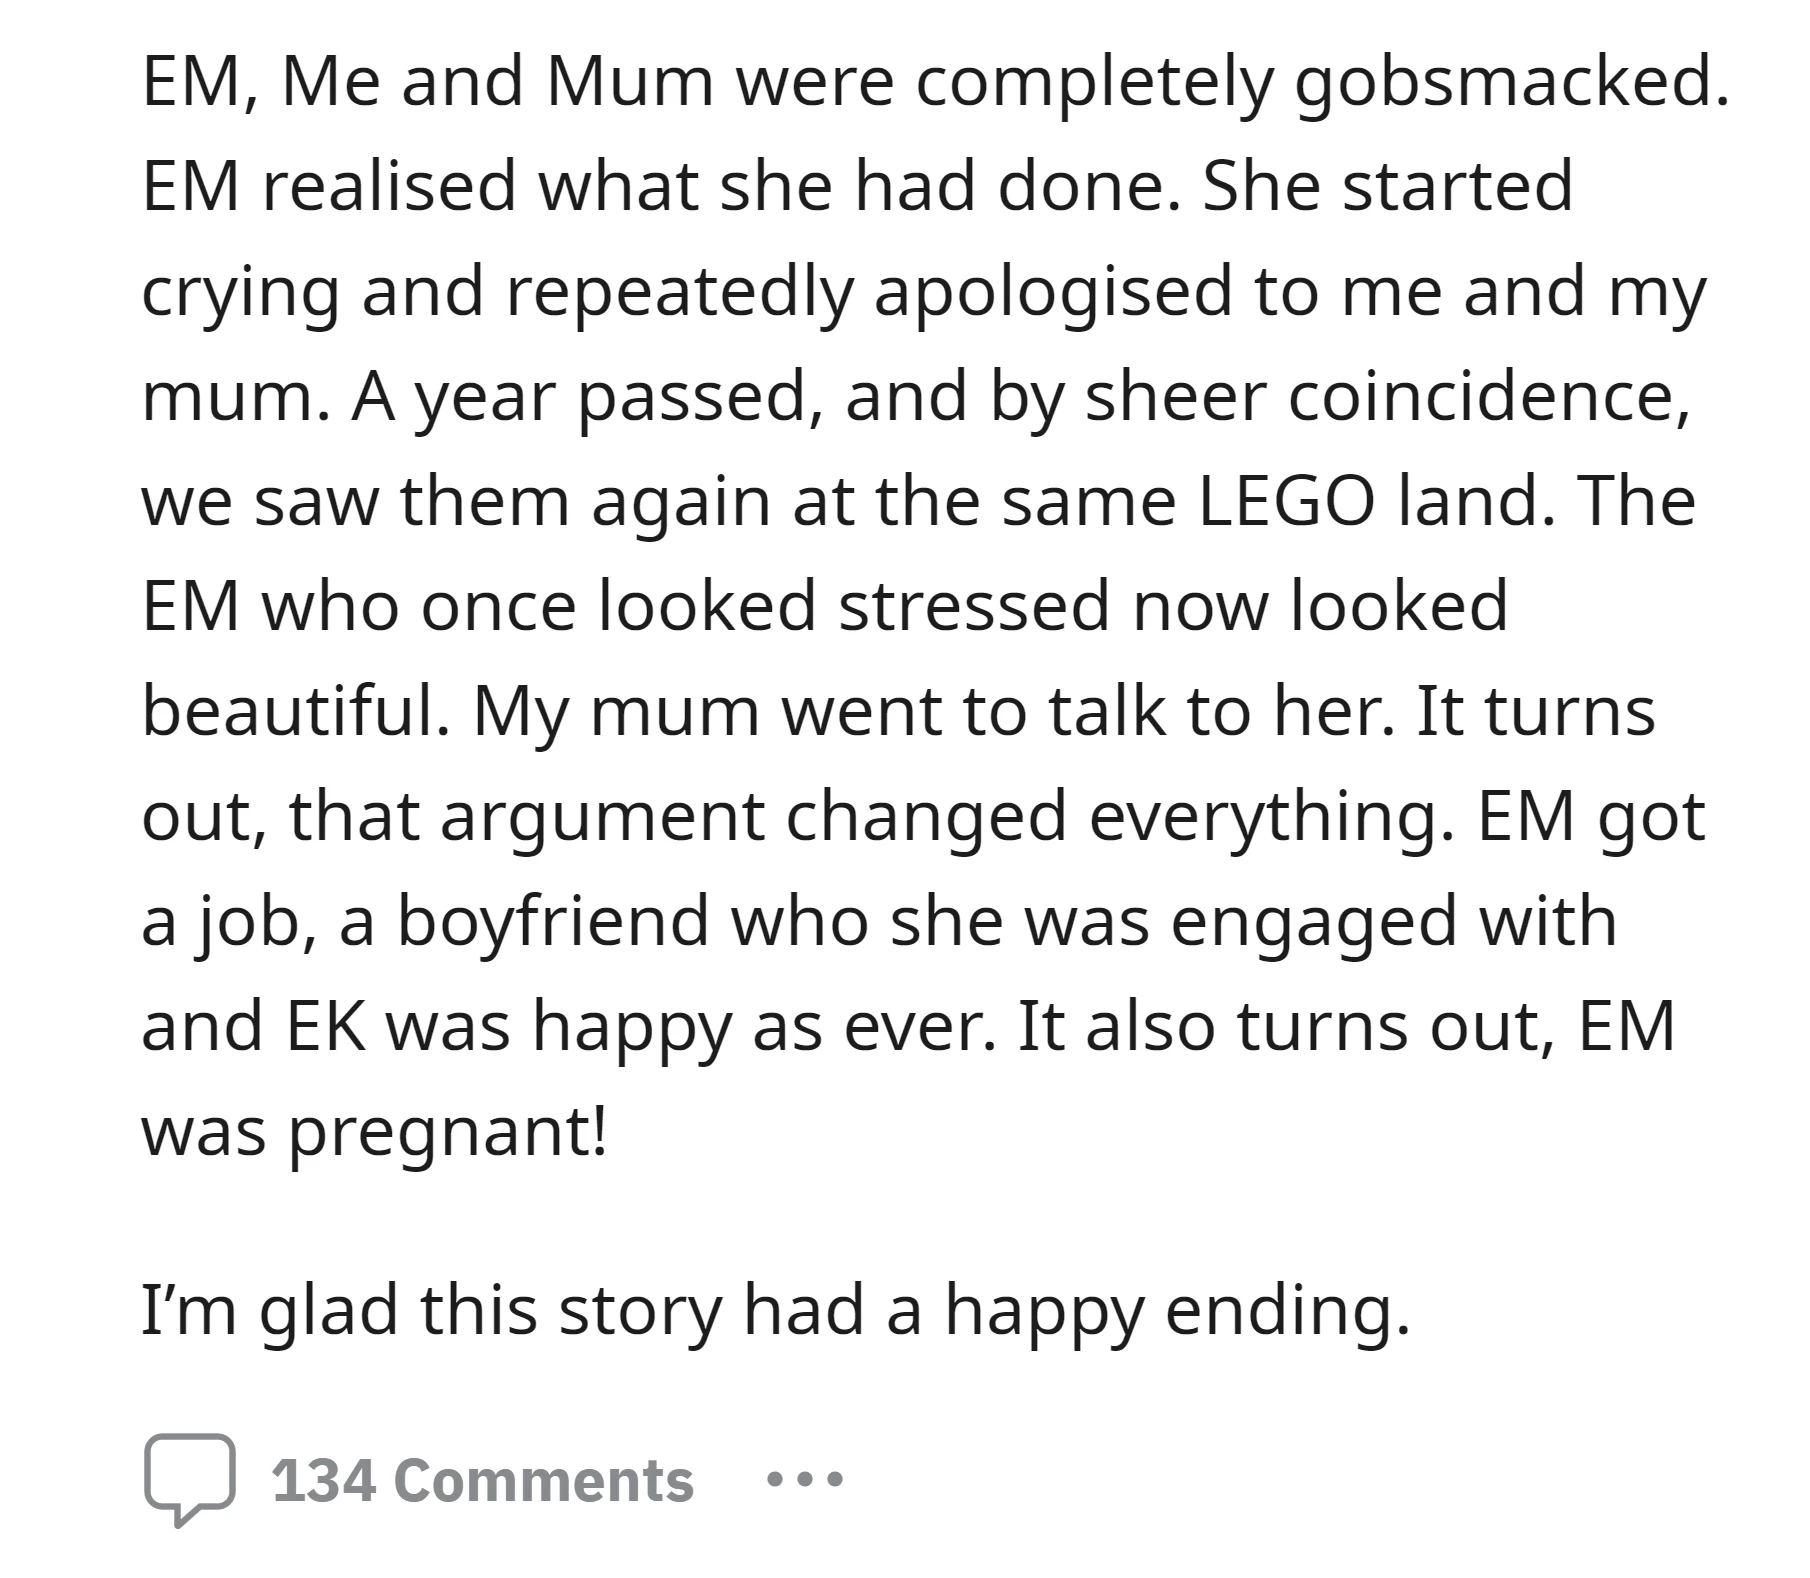 This story finally had a happy ending